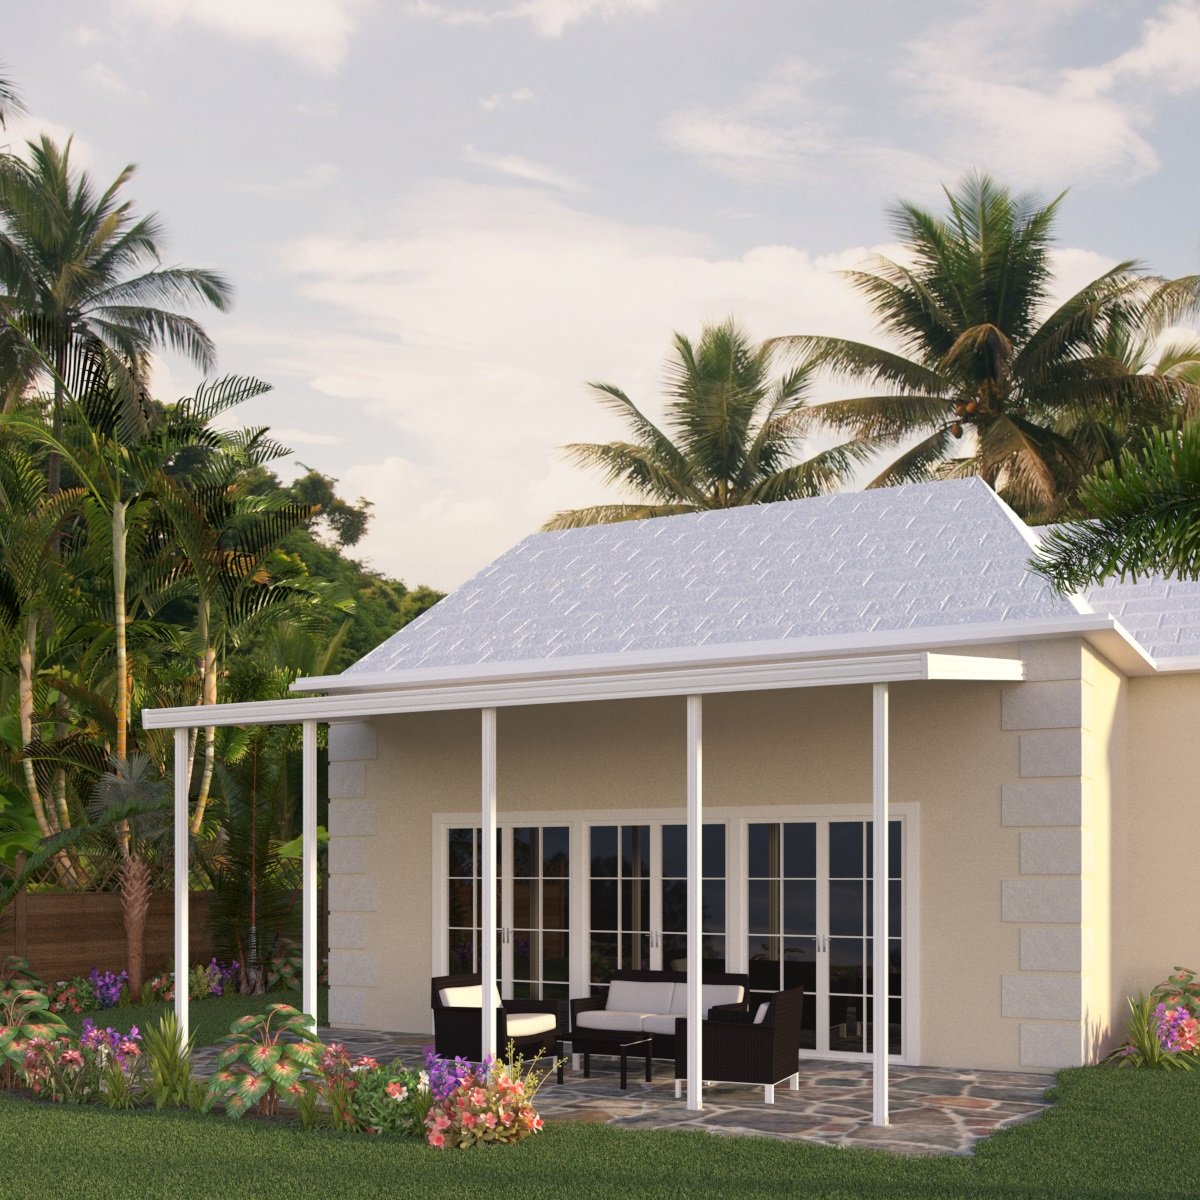 08 ft. Deep x 26 ft. Wide White Attached Aluminum Patio Cover -5 Posts - (10lb Low Snow Area)